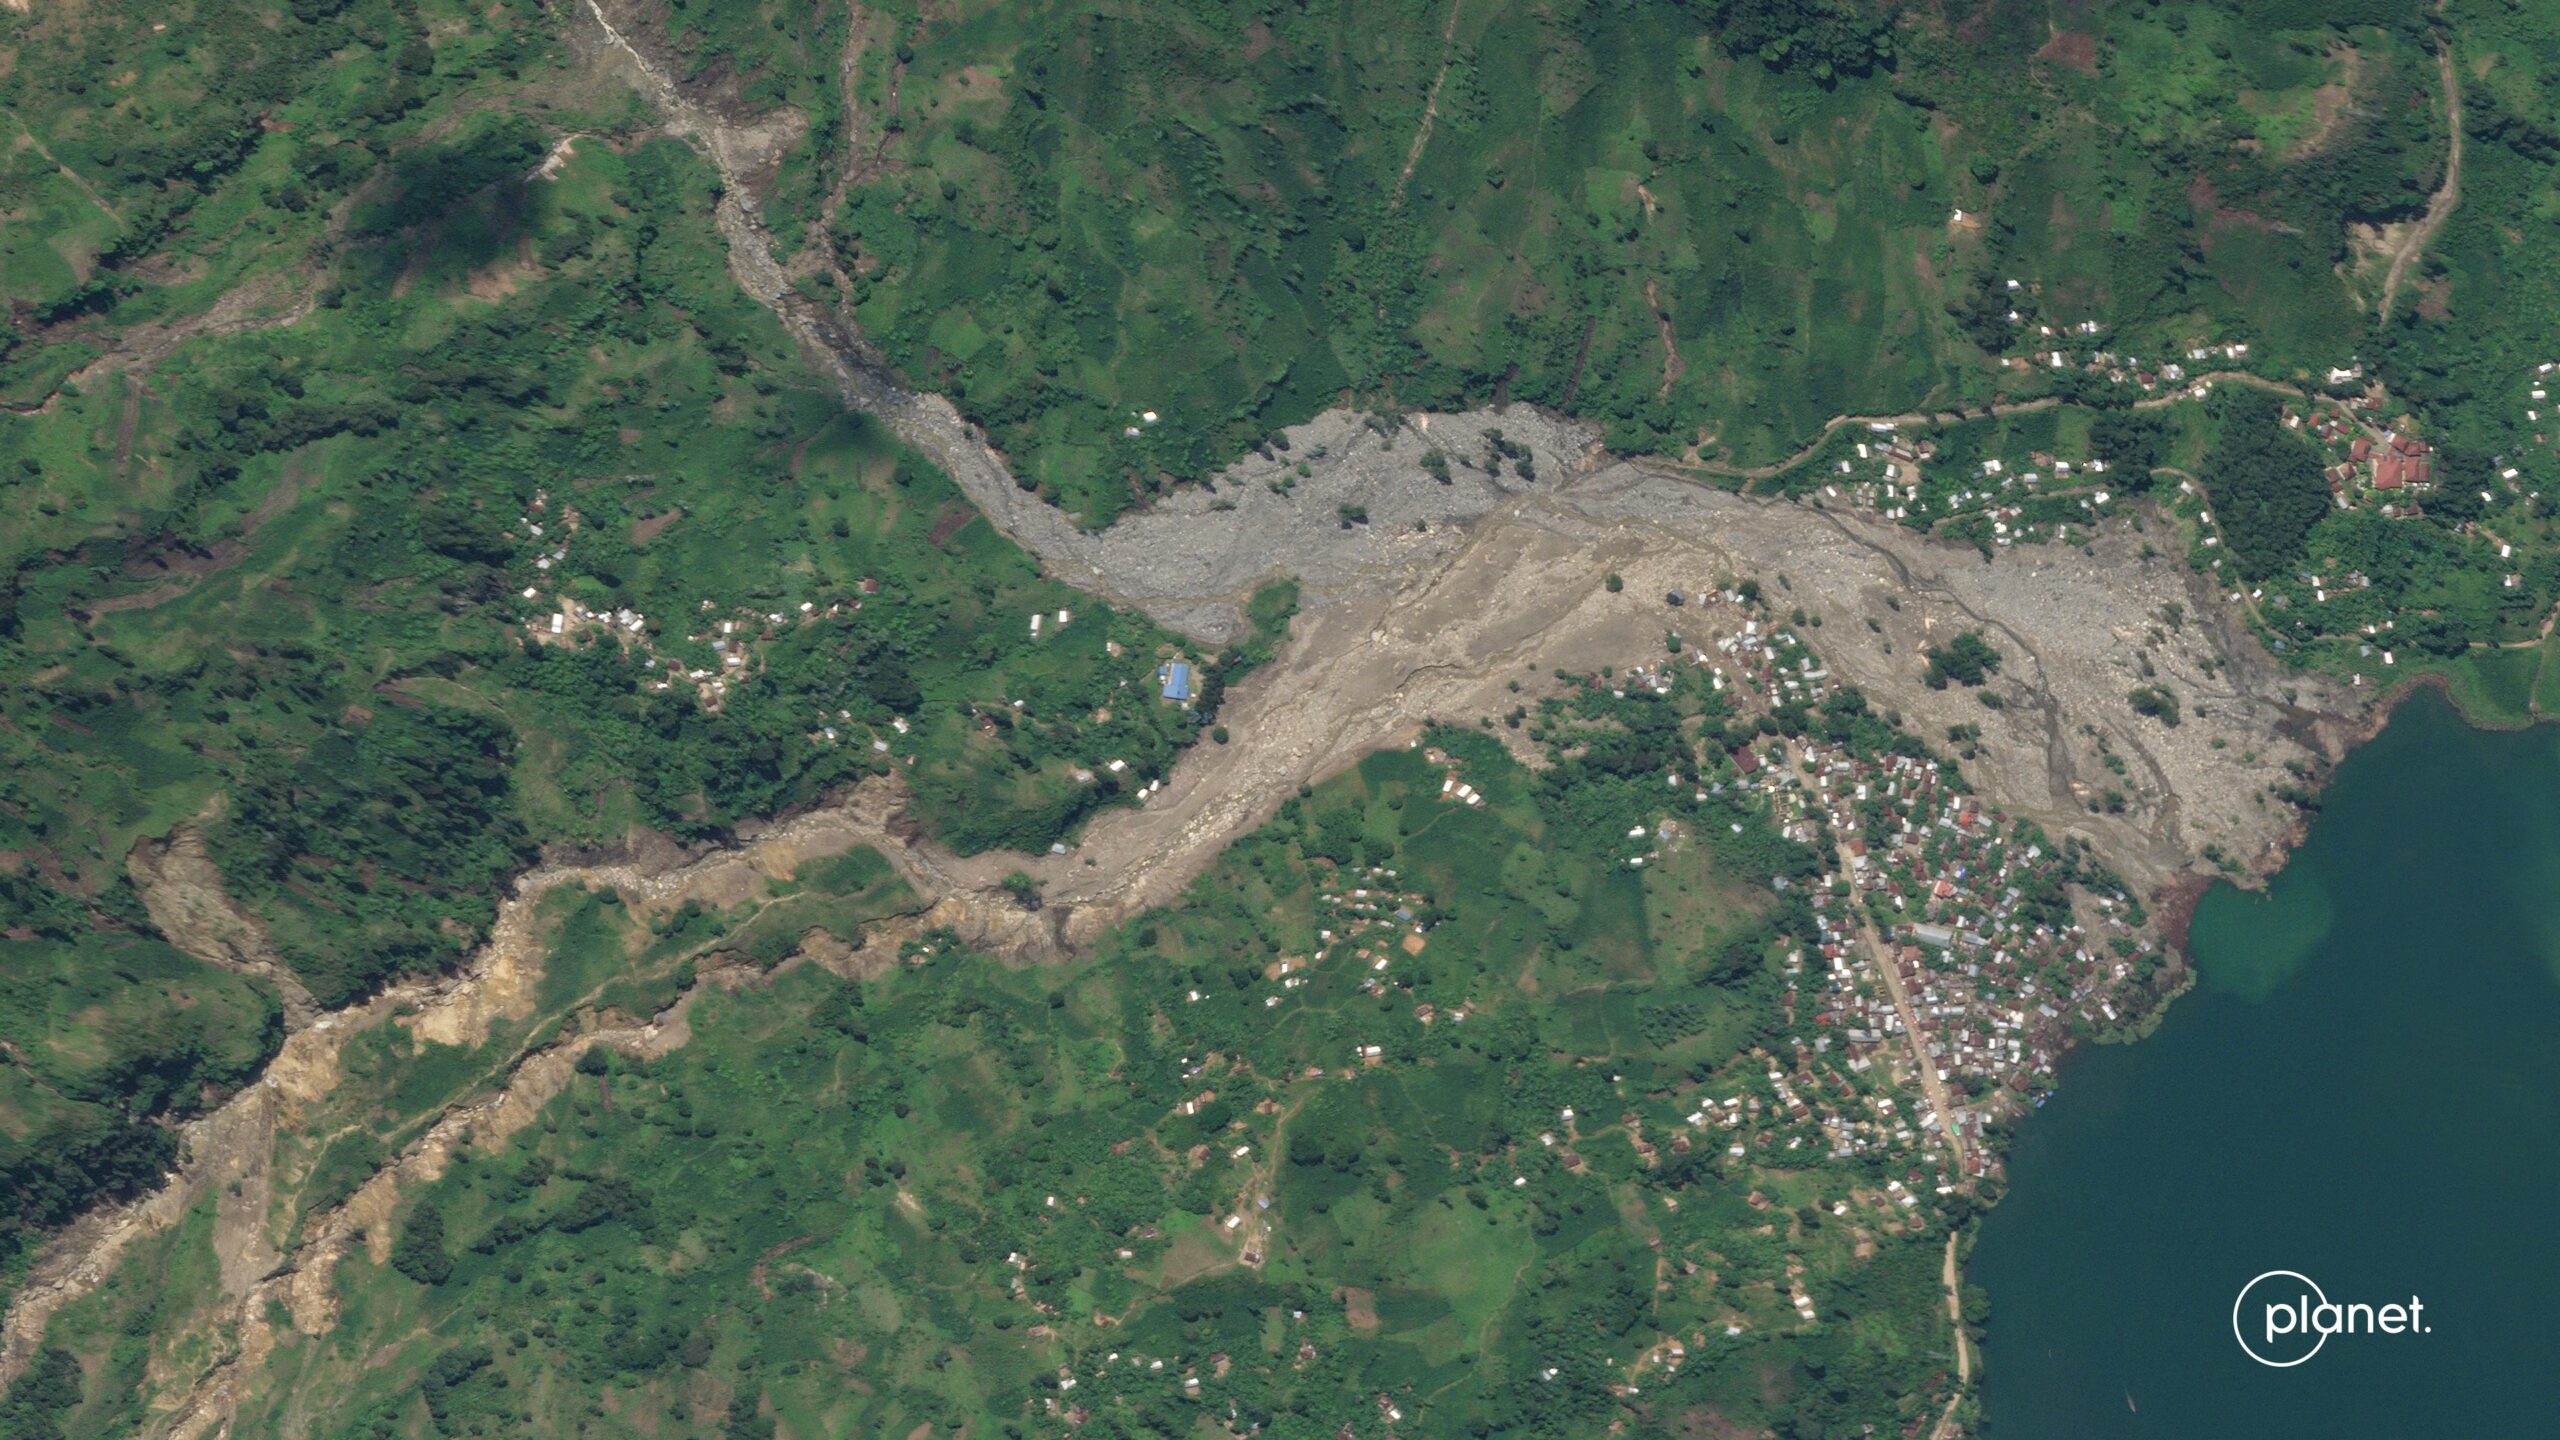 Planet SkySat image of the Lake Kivu landslides in the Democratic Republic of Congo.  This image shows the area around Nyabibwe